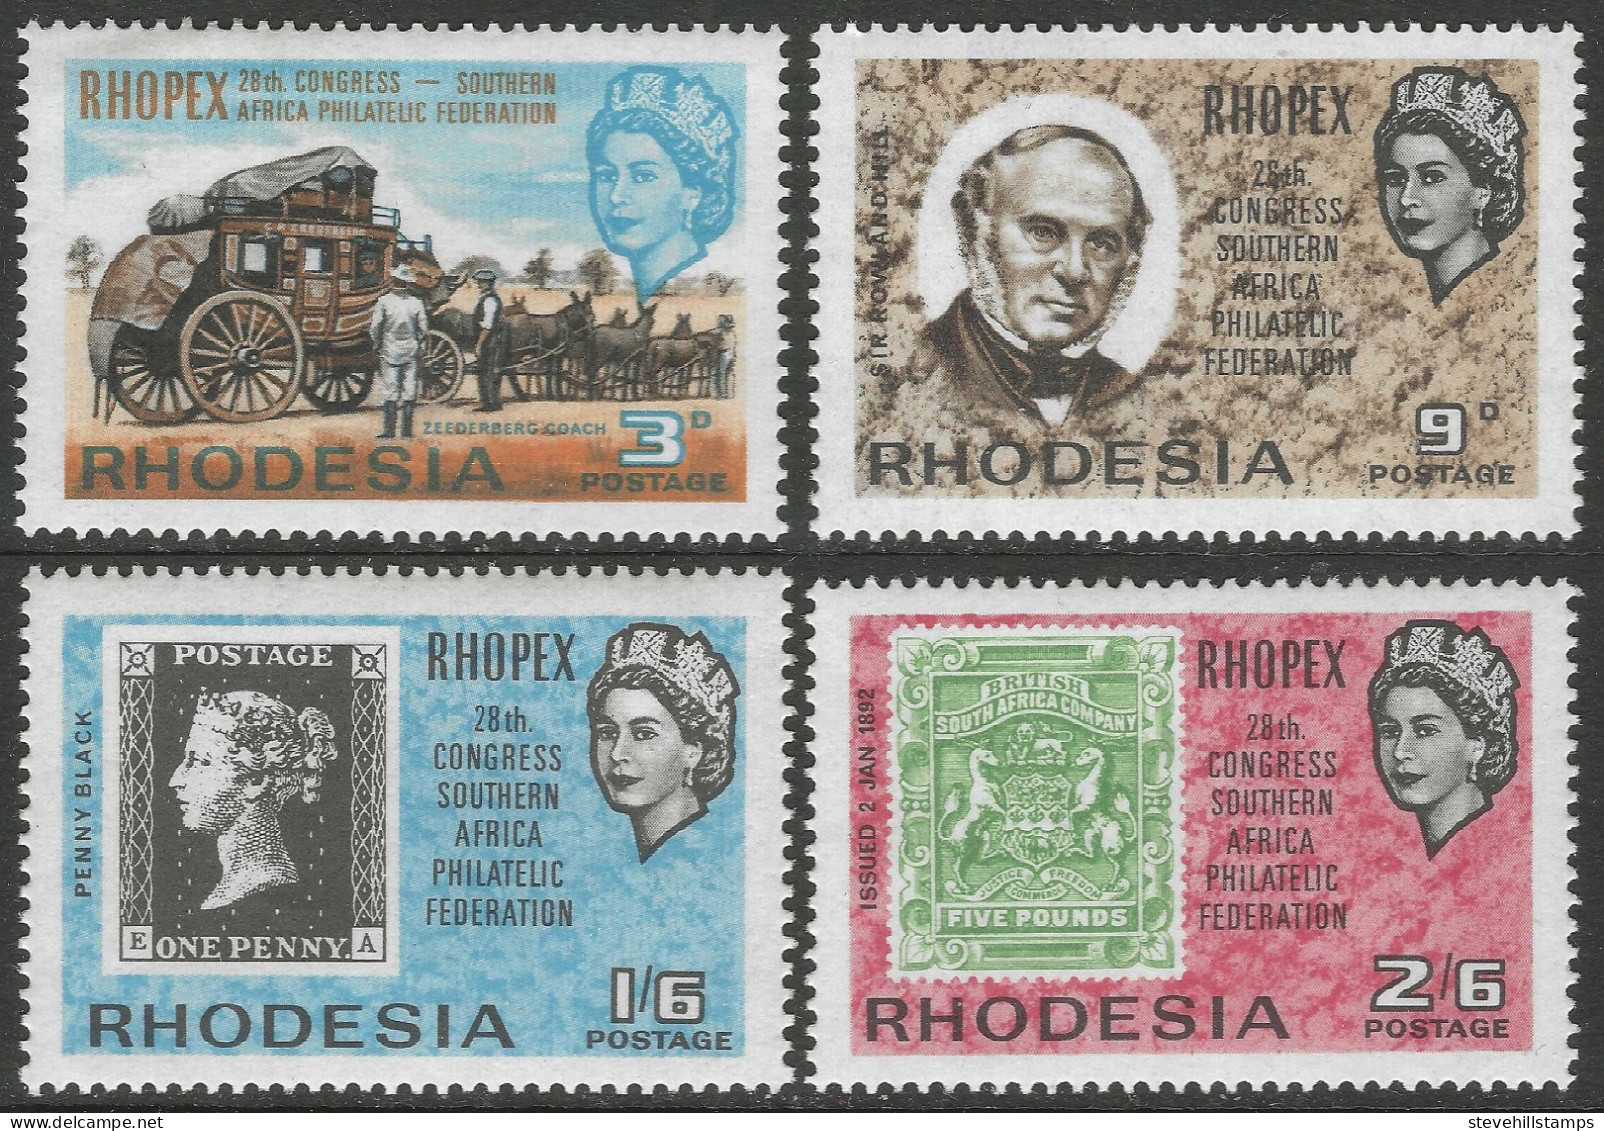 Rhodesia. 1966 28th Congress Of Southern Africa Philatelic Federation (RHOPEX). MH Complete Set. SG 388-391 - Rhodésie (1964-1980)